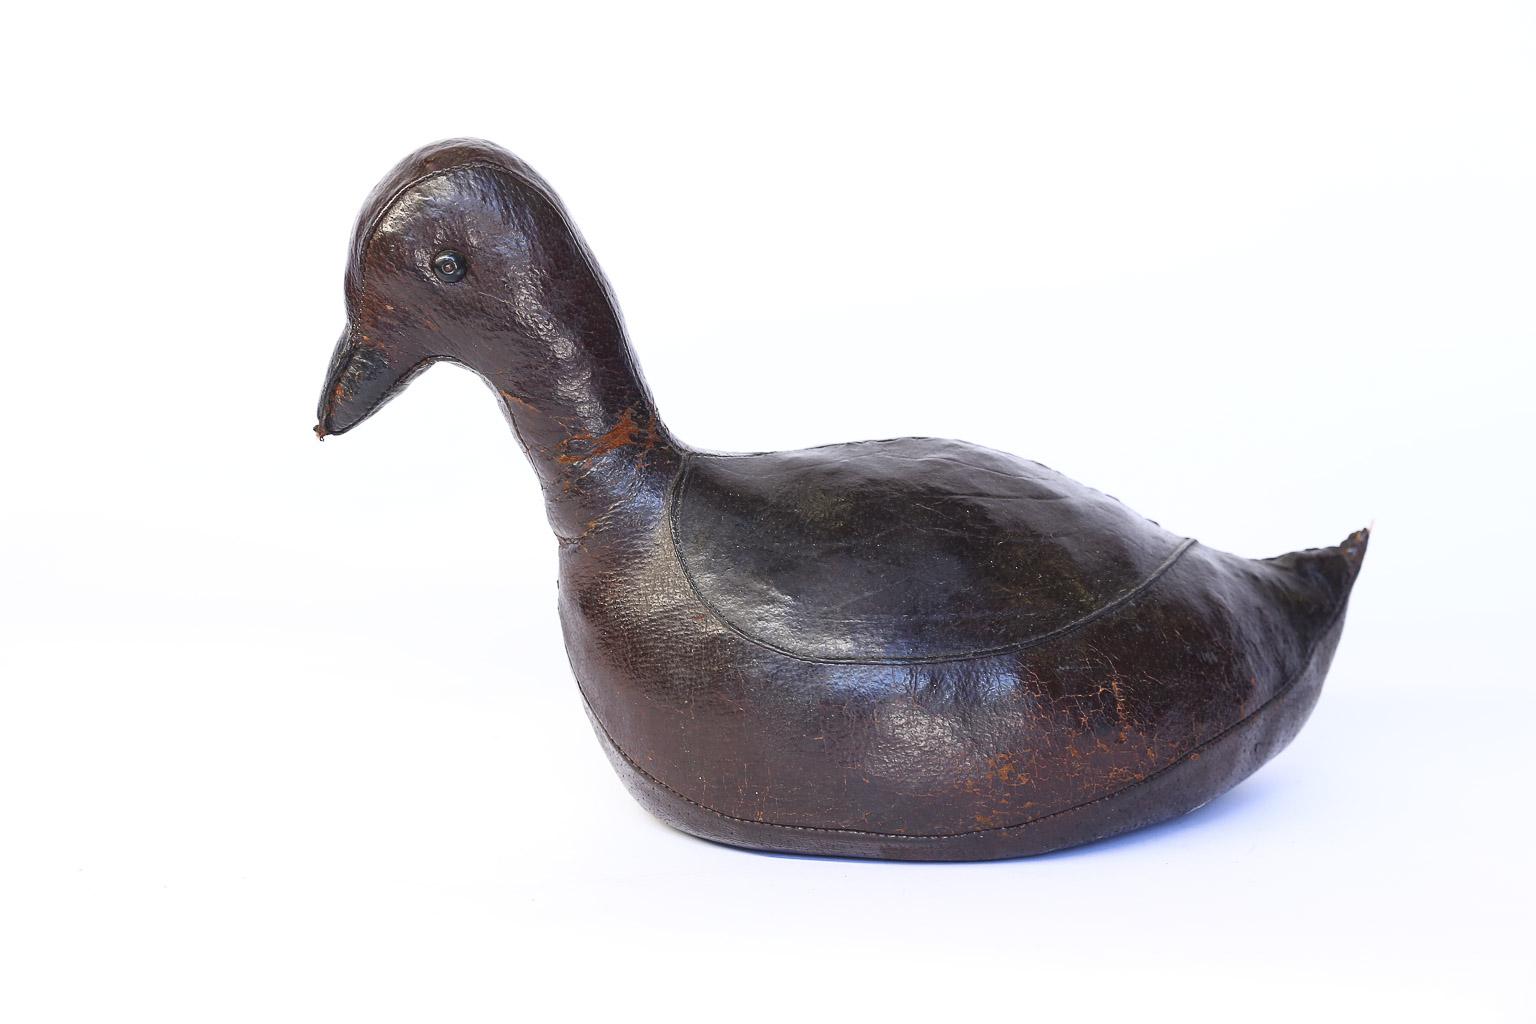 This is a beautiful leather doorstop by Dimitri Omersa in the shape of a duck. Omersa Co., England, produced several animals as footstools and doorstops for Abercrombie and Fitch. This sweet duck is a wonderful conversation piece and useful as a